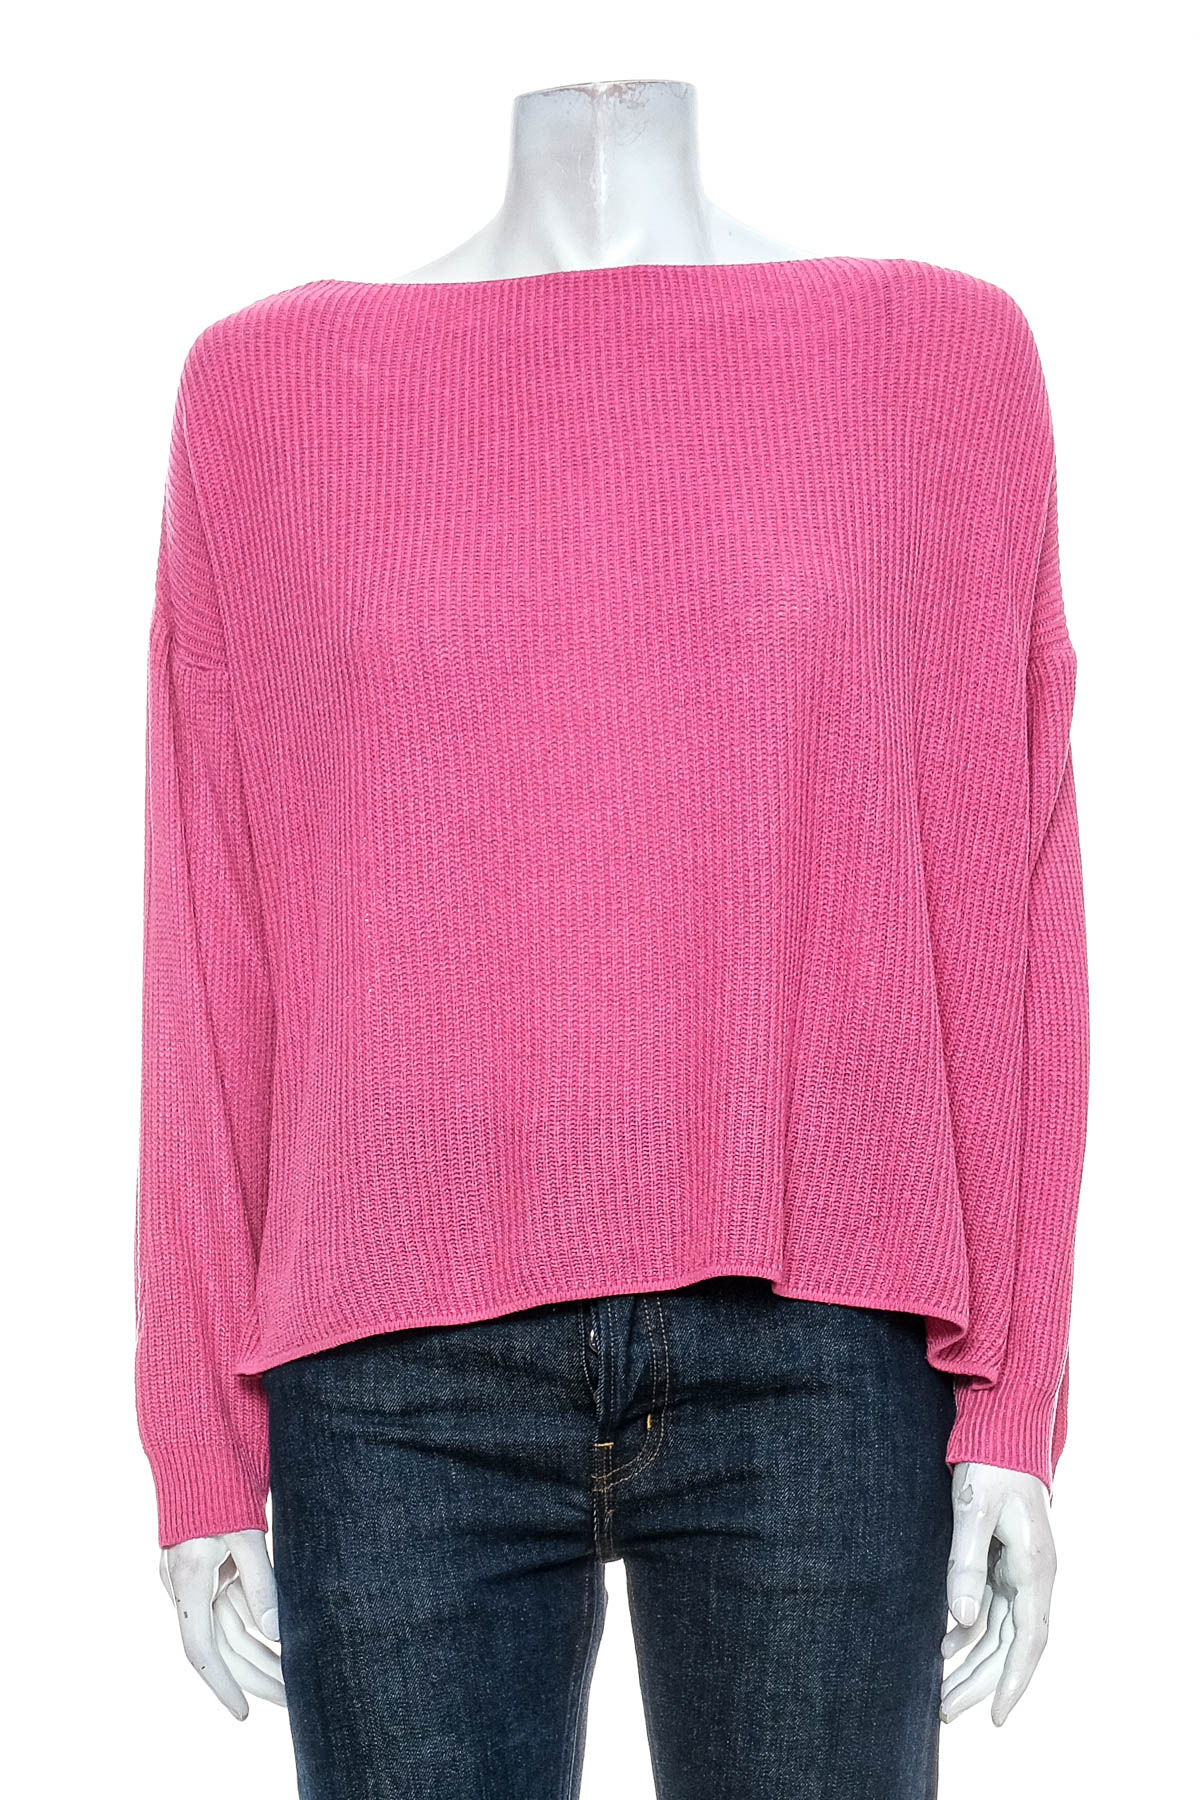 Women's sweater - New Collection - 0